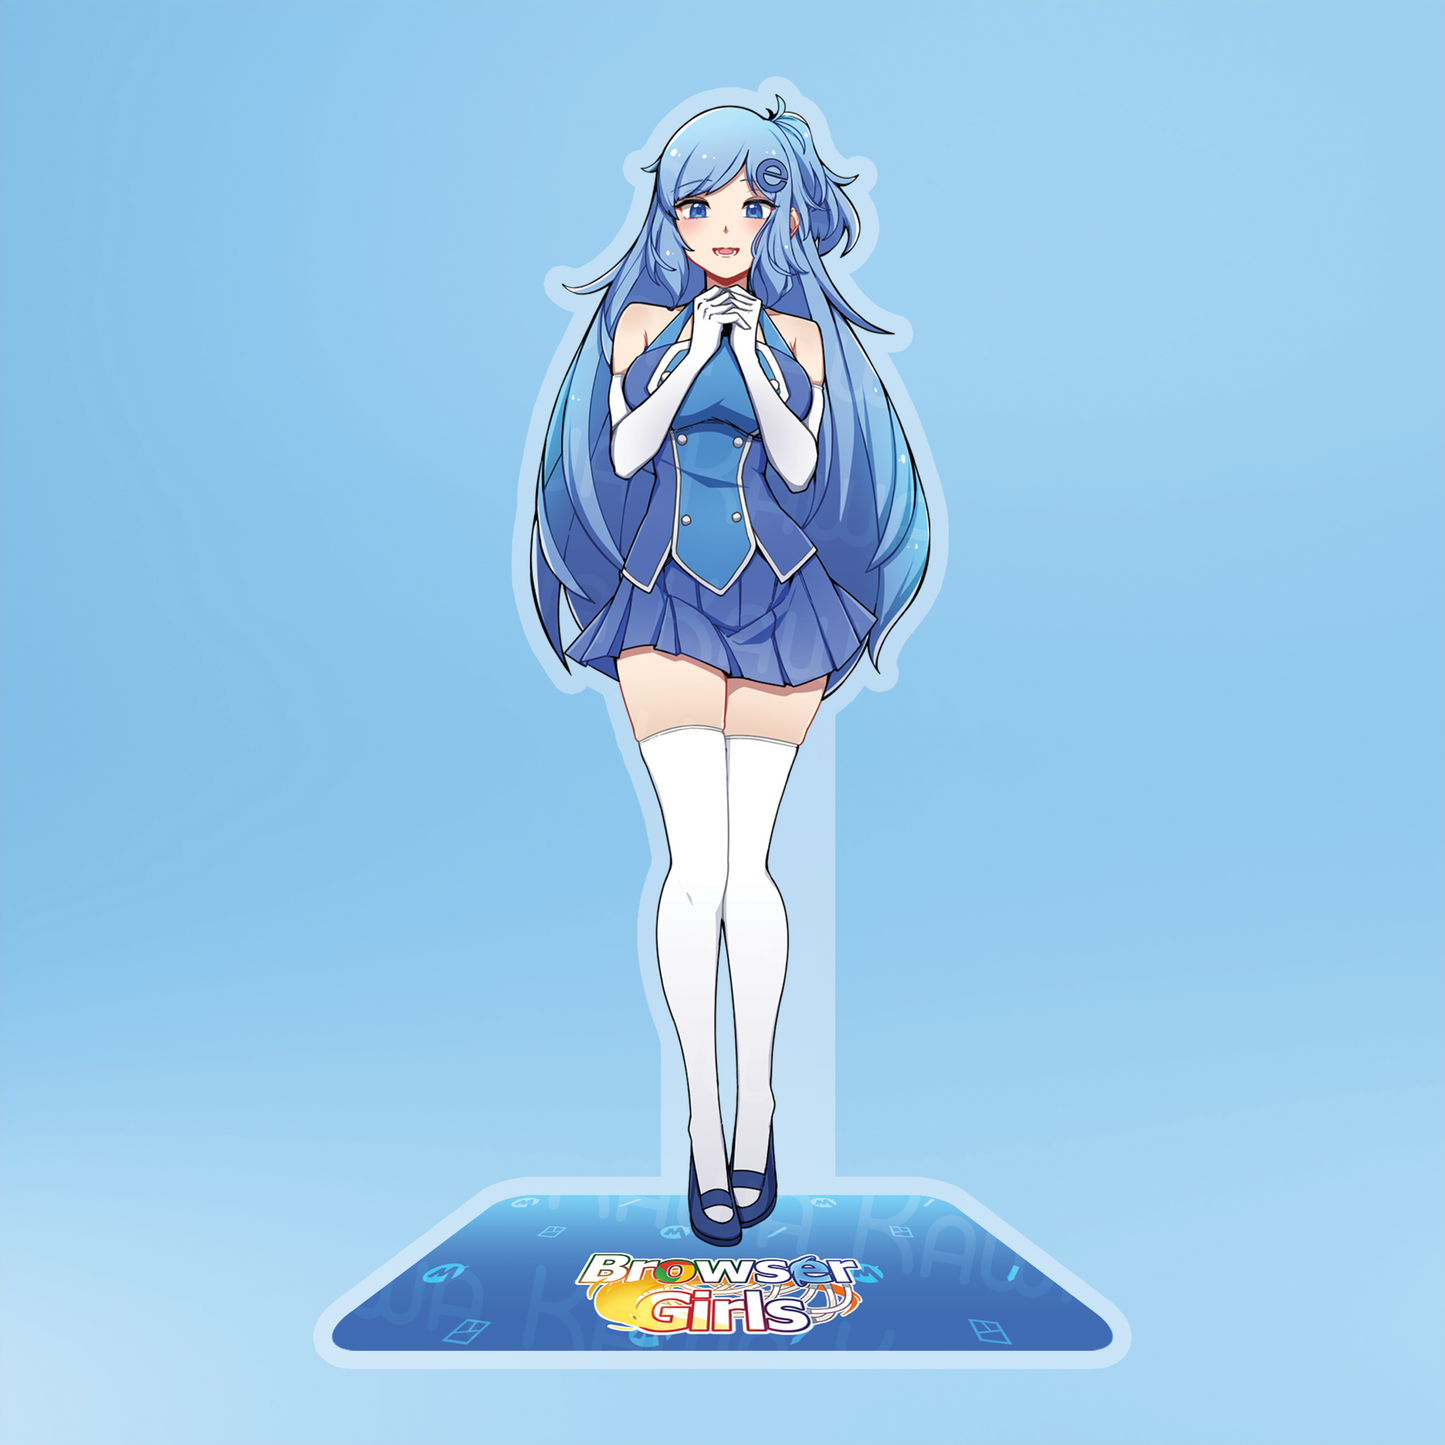 Browser Girls : IE-chan Acrylic Standee